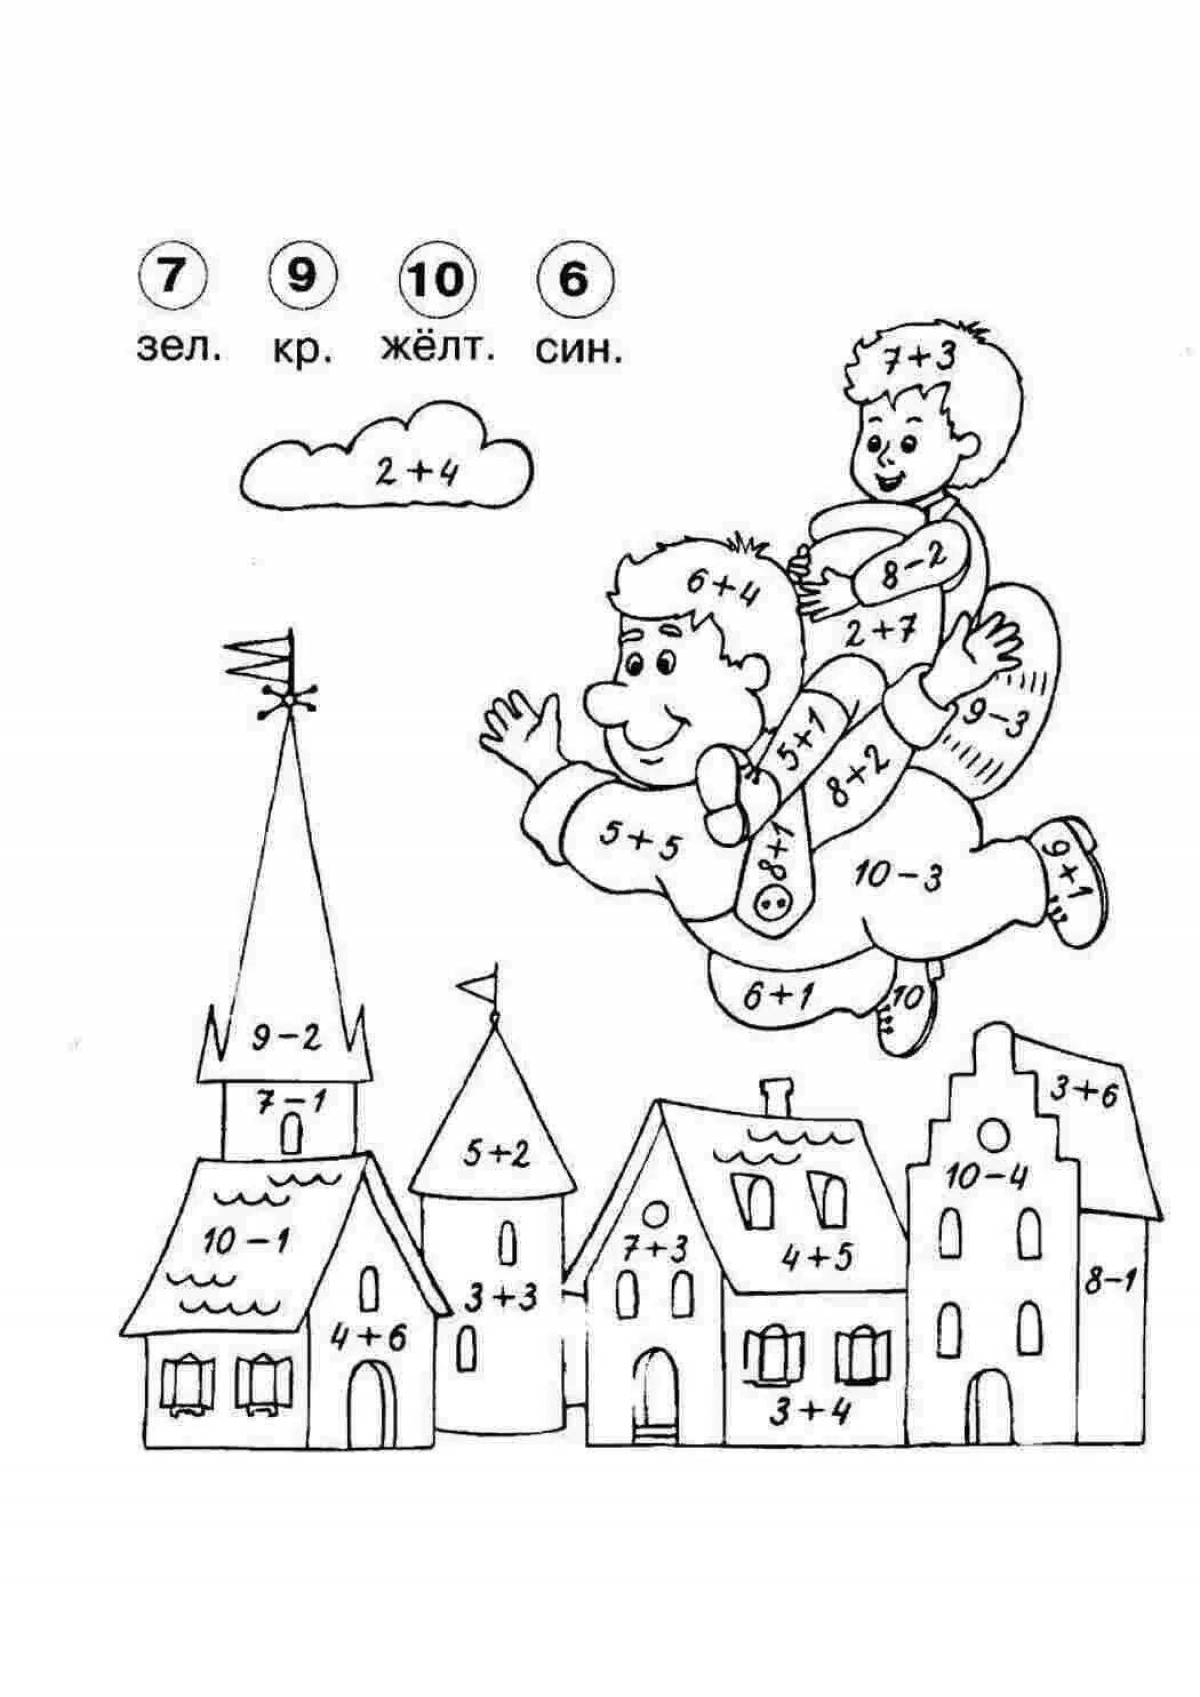 Coloring book for first graders with tasks